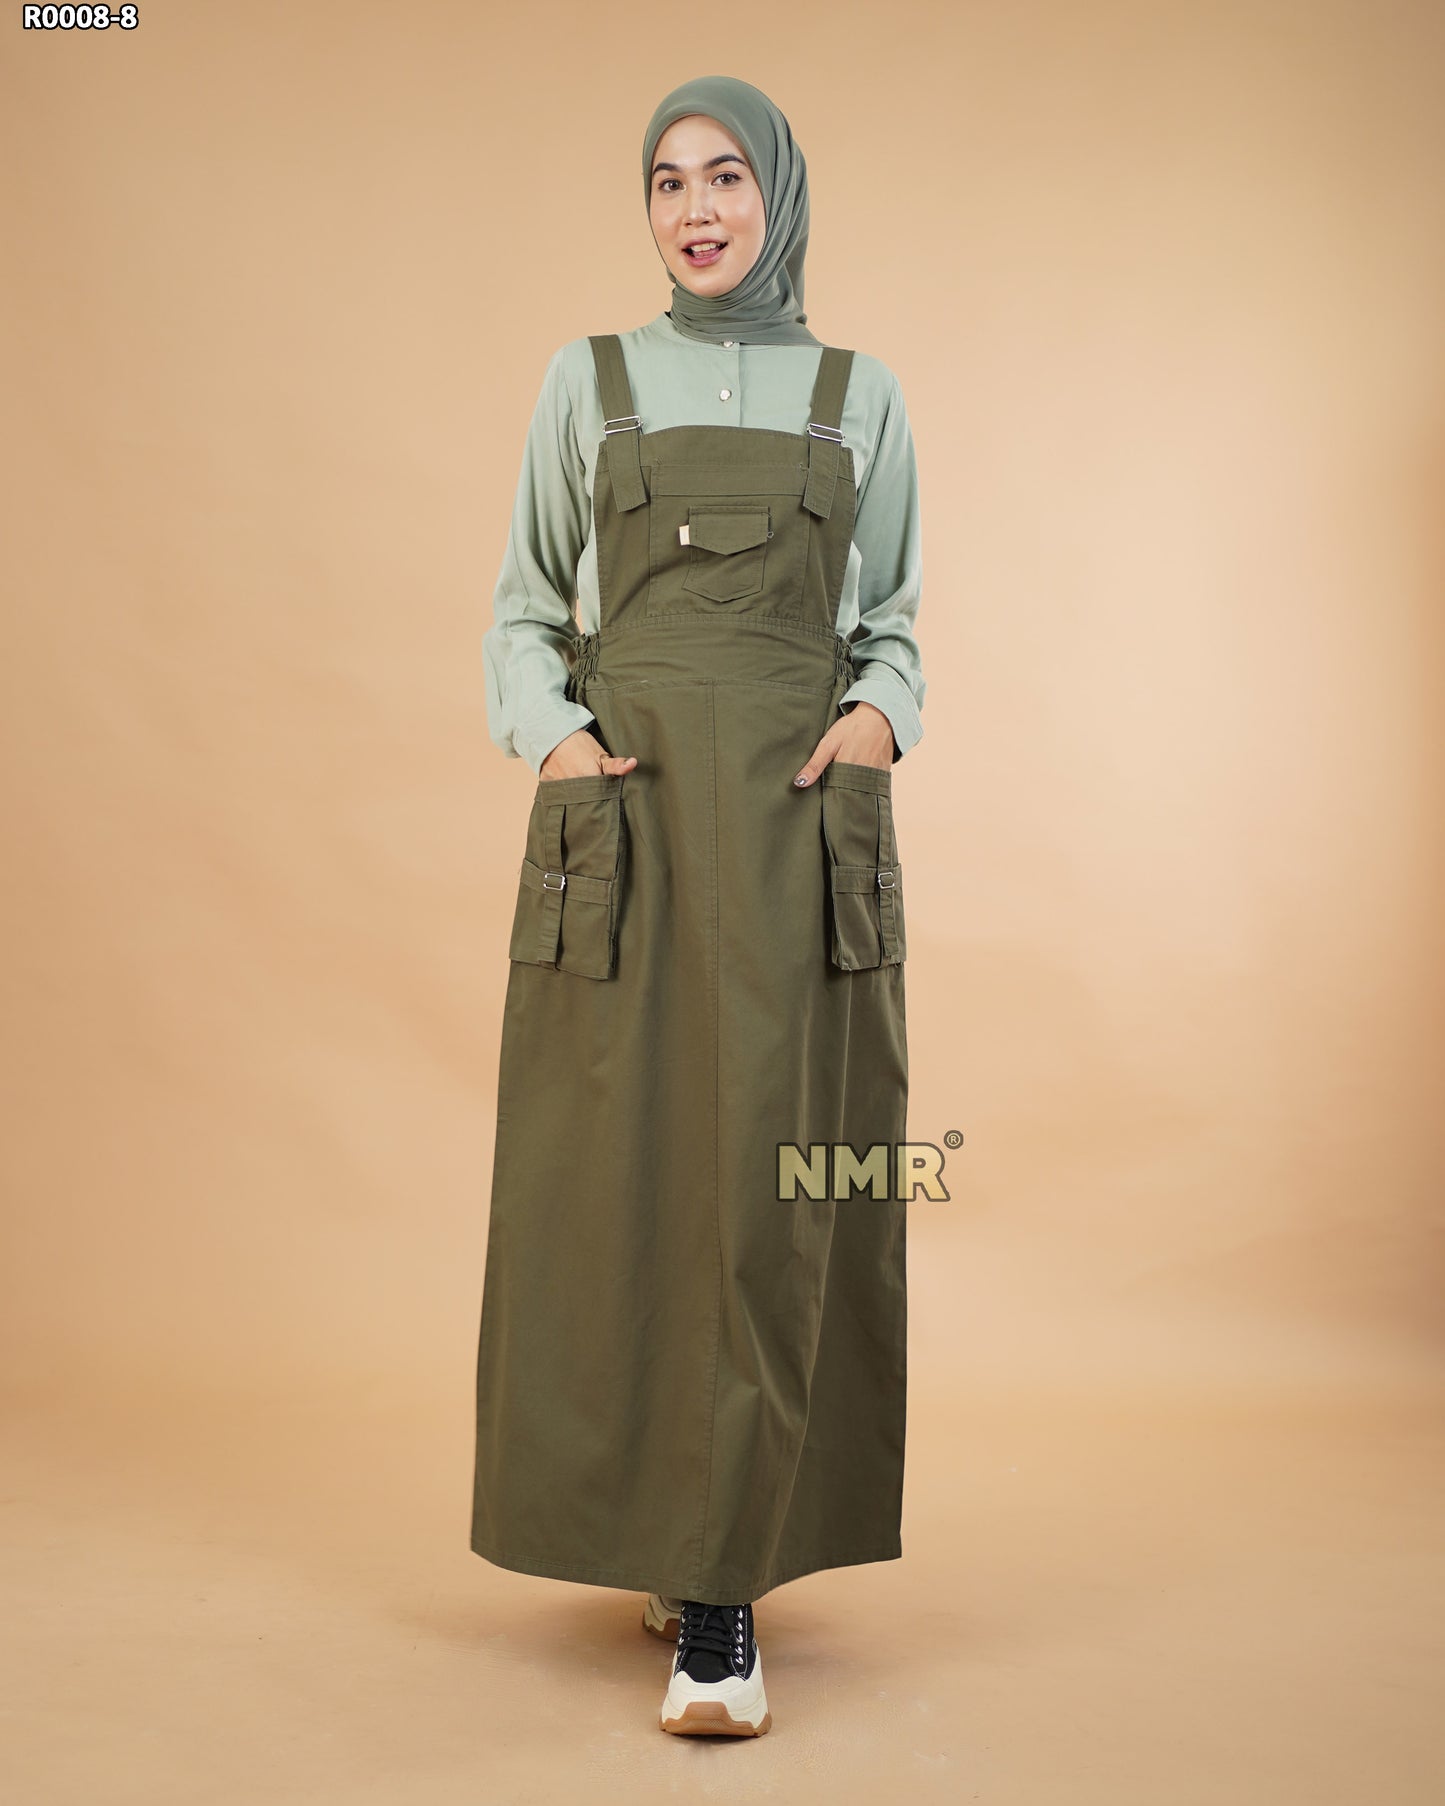 NMR Gamis Jumpsuit Overall Baby Canvas Vol R0008-8